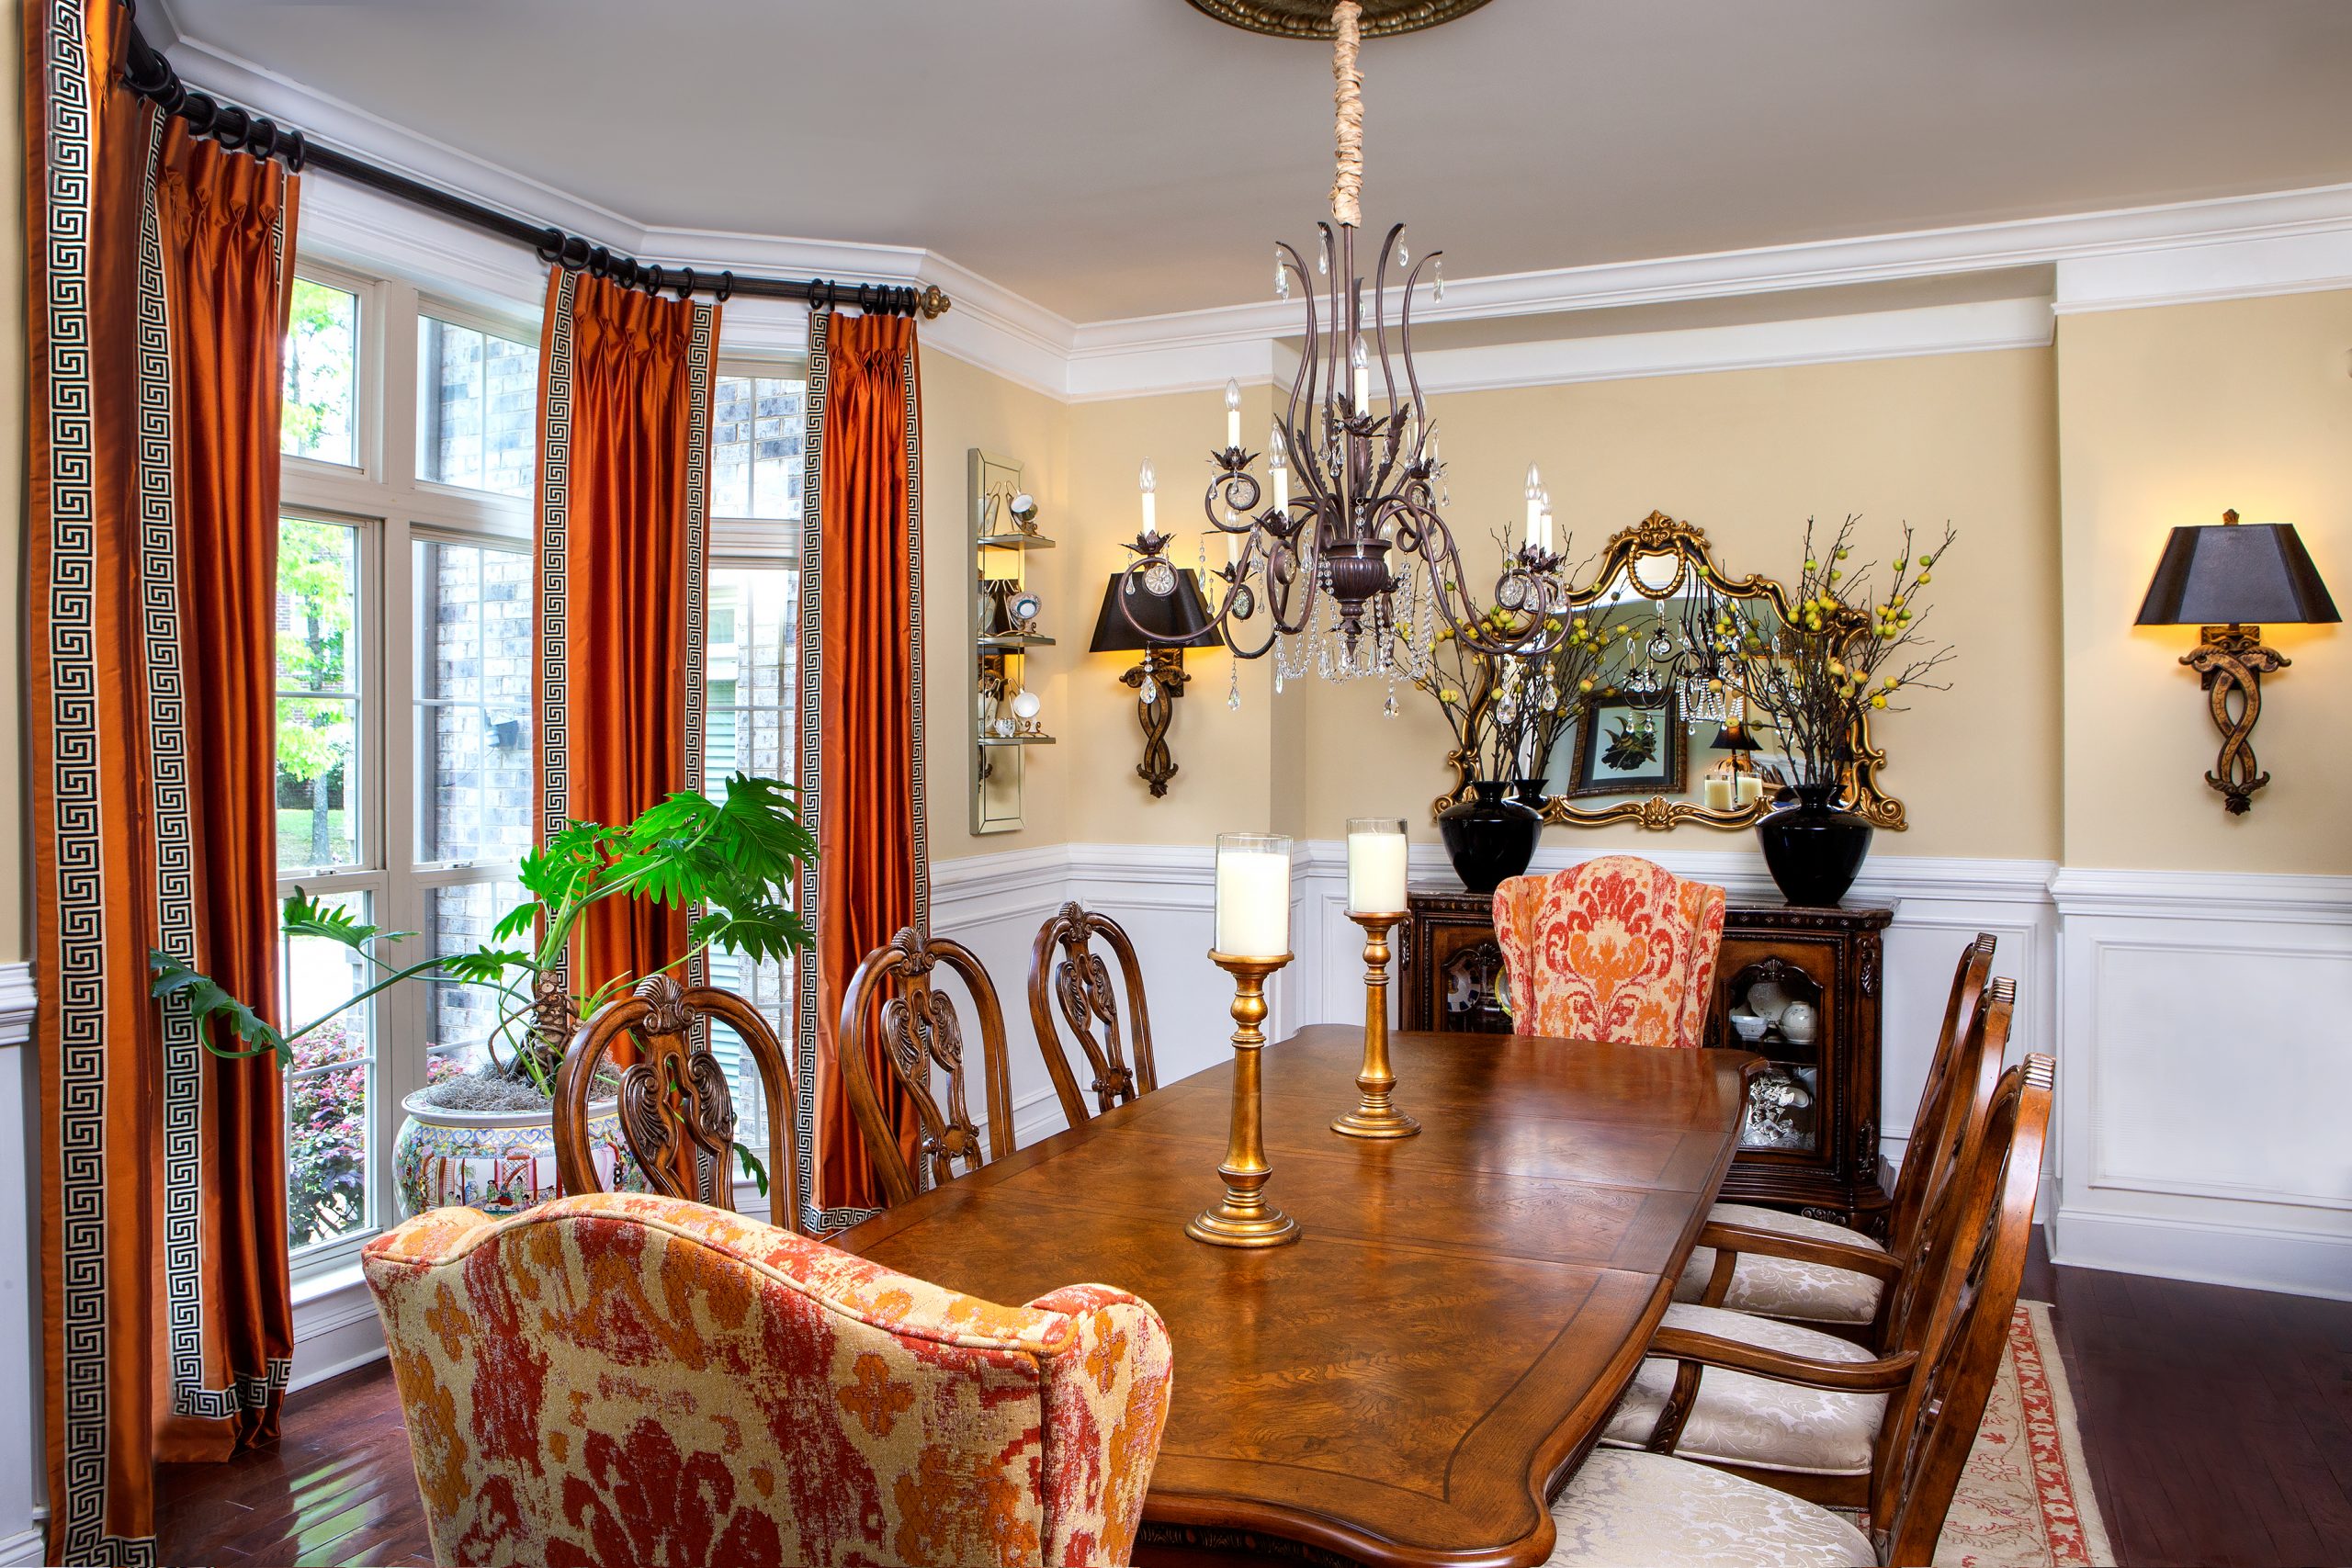 The large dining room has a fabulous ambiance with warm yellow walls and a gracious bay window. Host and hostess chairs in ginger and orange on cream complement the rug, and a handsome mirror over the buffet reflects the entrance hall and sparkling chandelier.